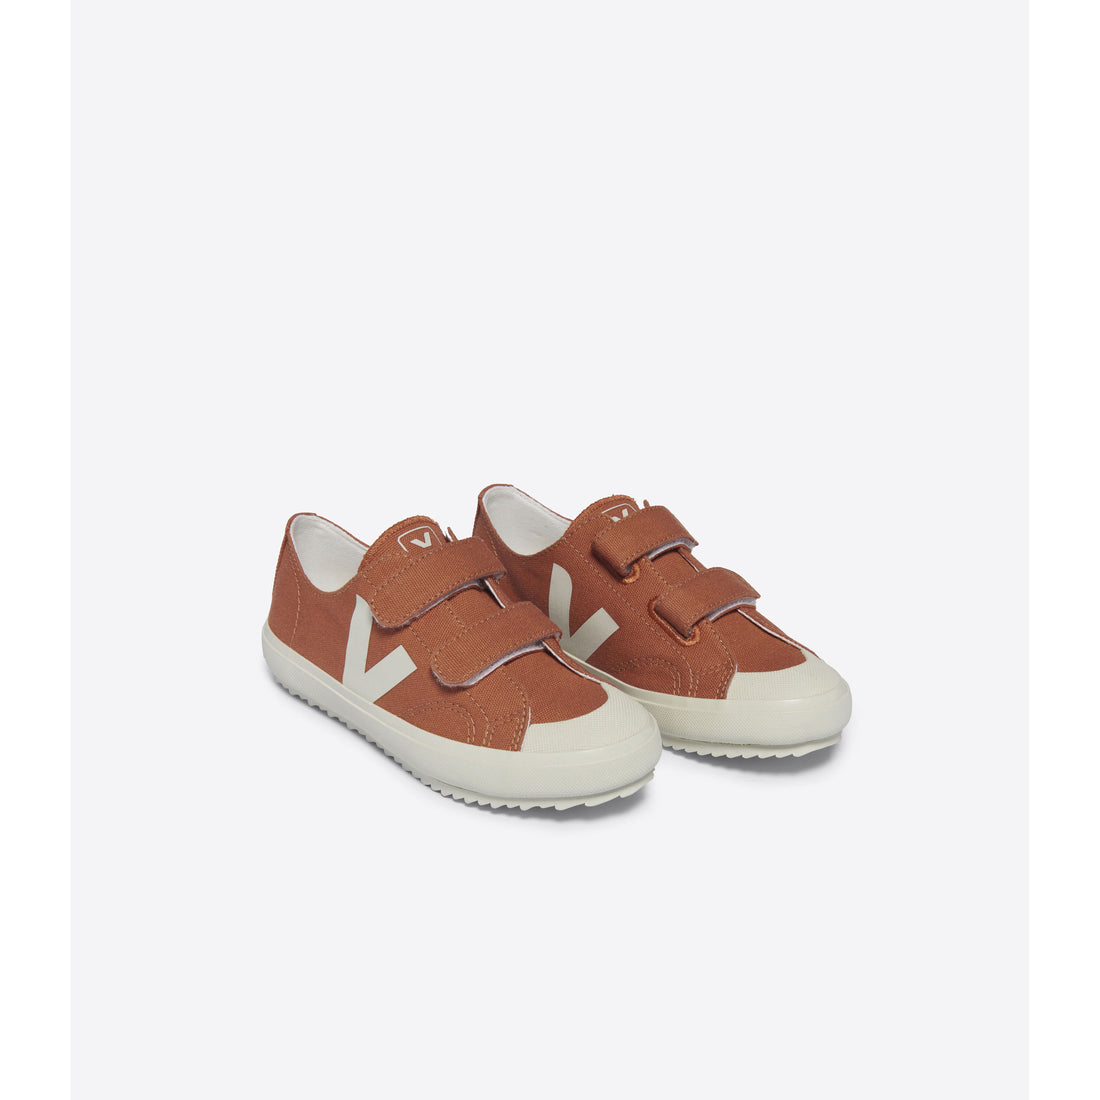 Veja Canyon/Pierre Small Ollie Canvas Sneakers